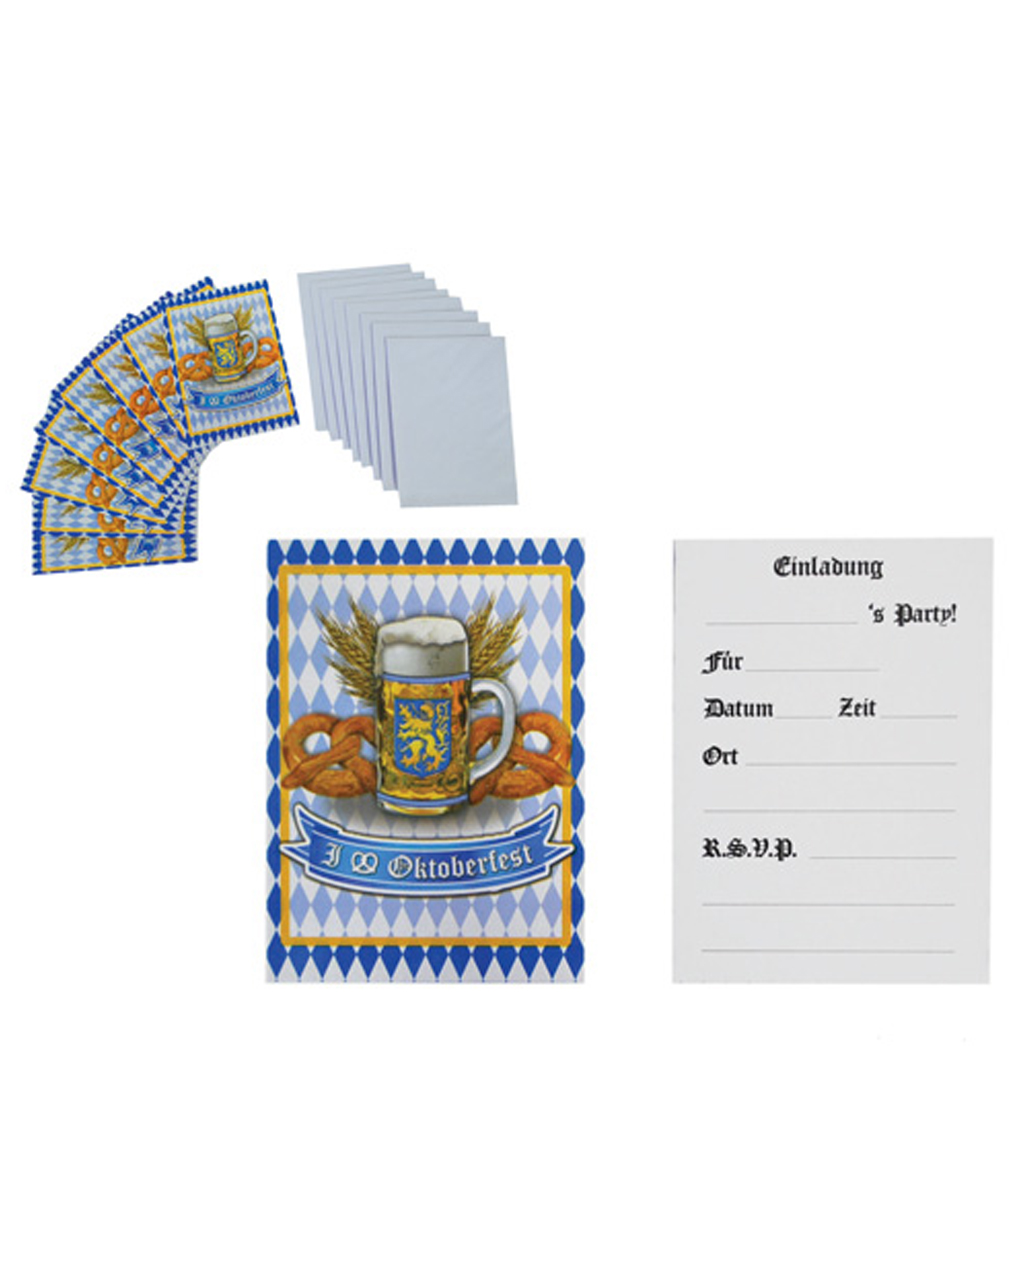 Oktoberfest Party Invitations 8 Pc For Beerfest Horror Shop Com